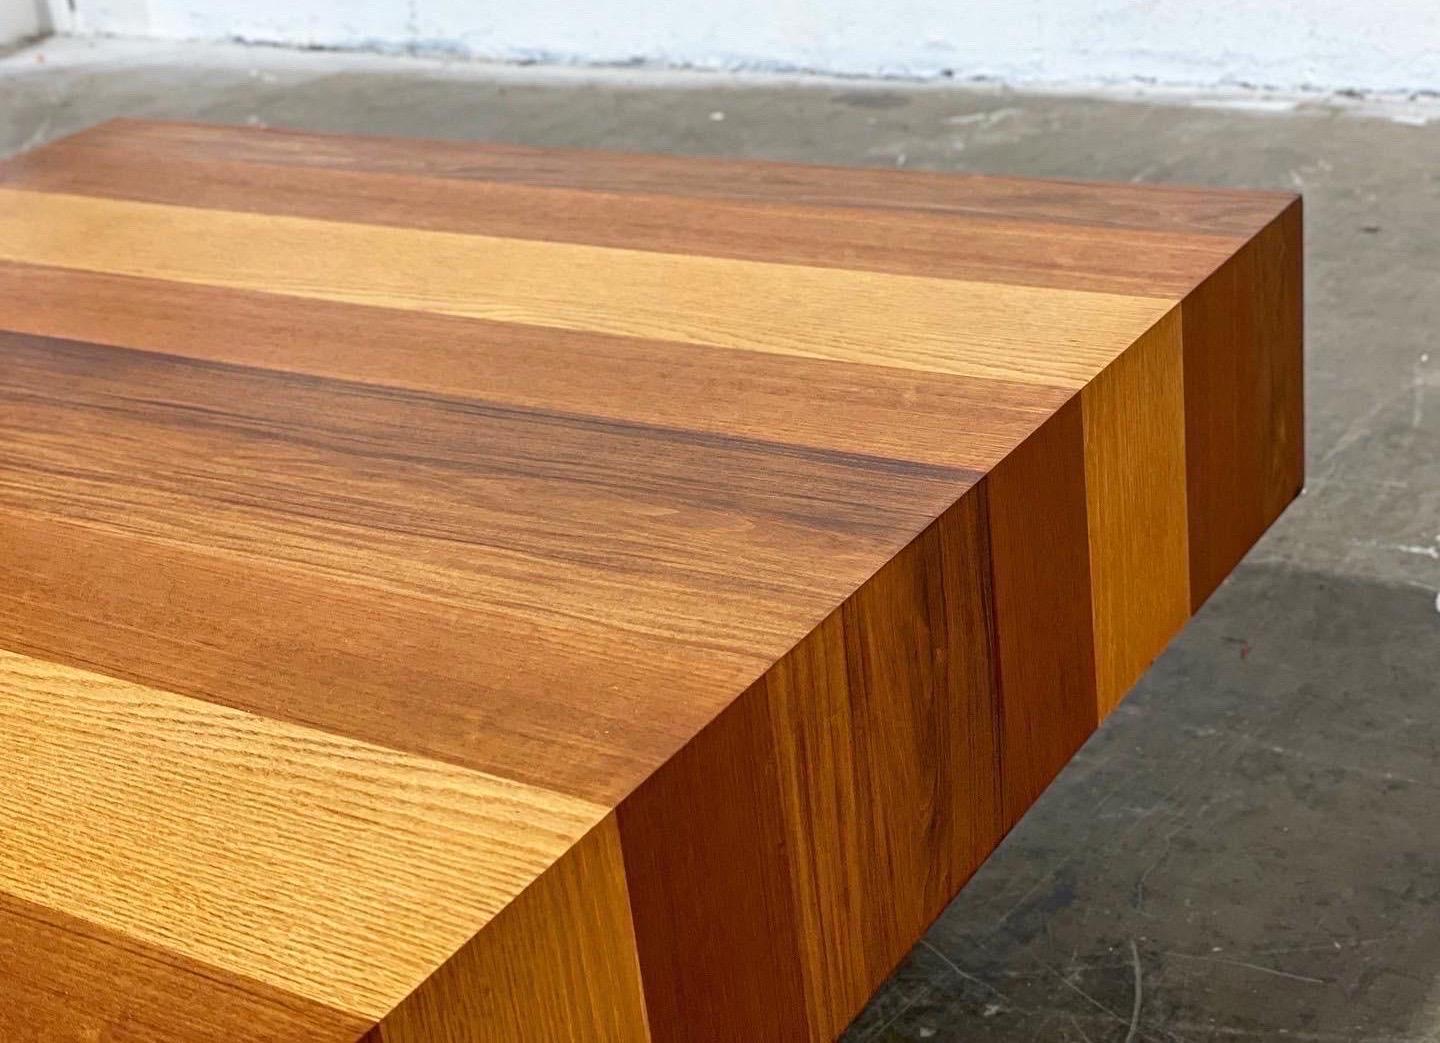 Stellar square mixed wood cocktail by Dyrlund. Designed and built in Denmark circa 1973. Table rests on a recessed black plinth base. Top consists of mixed veneers of walnut, teak, rosewood, oak, palisander, and butternut. Visually stunning - the